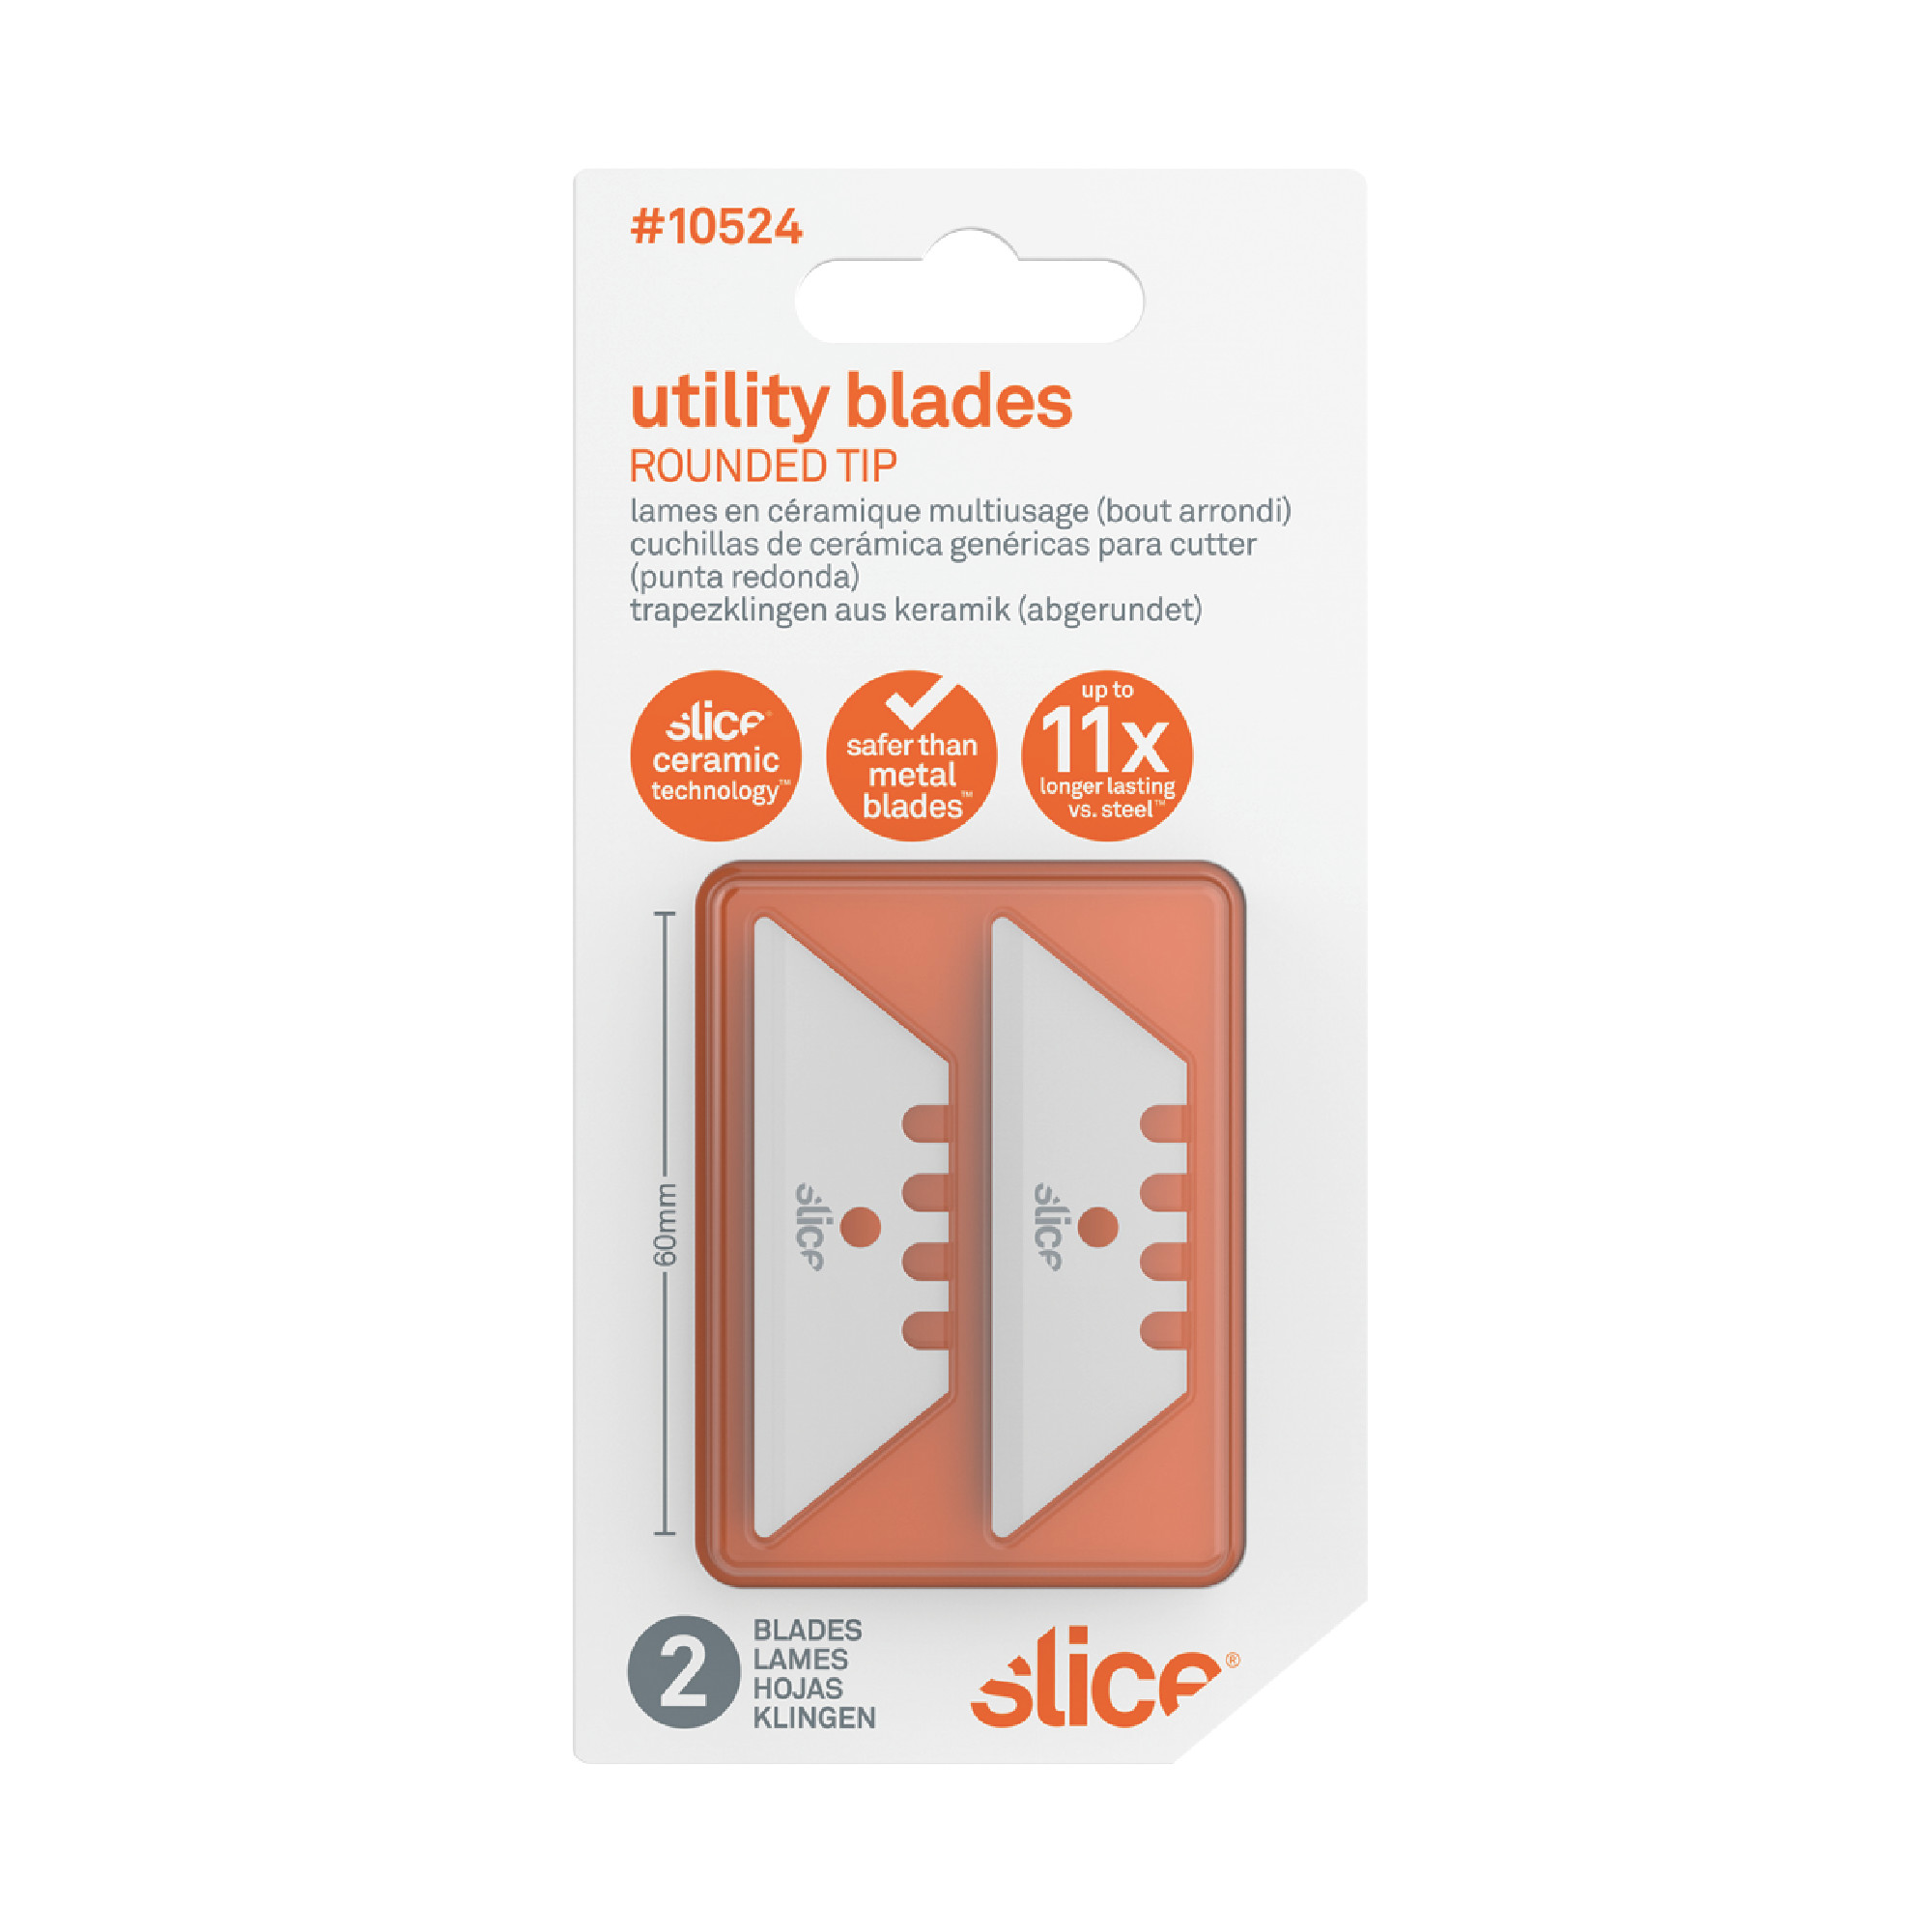 Rounded Tip Utility Blades